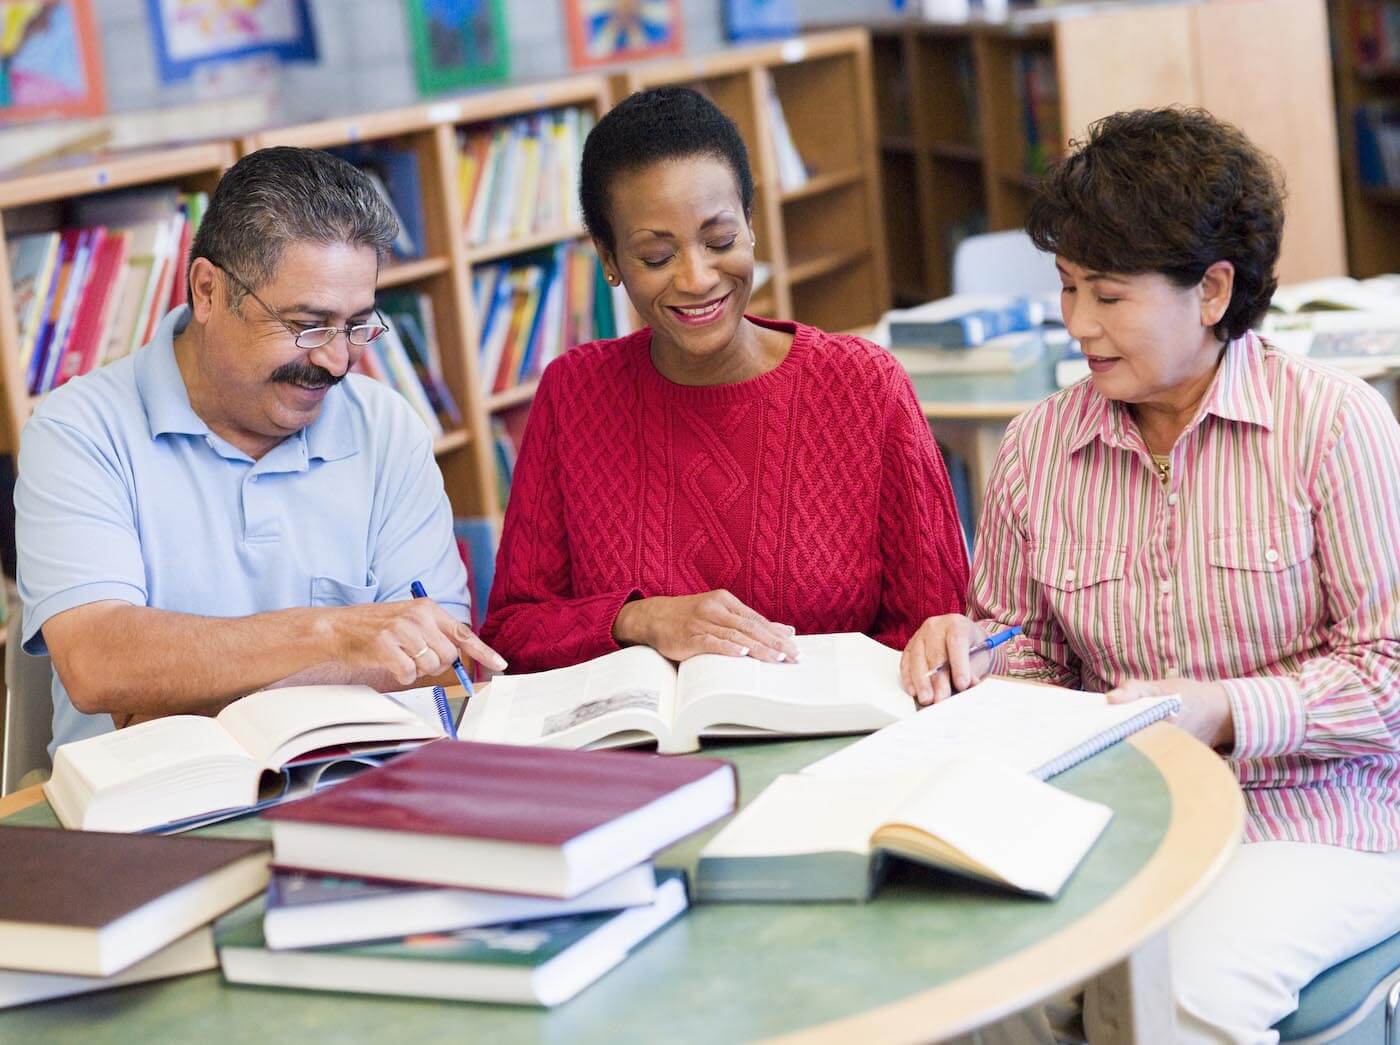 A man and two women sit at a table in a library while looking at their school books and smiling.